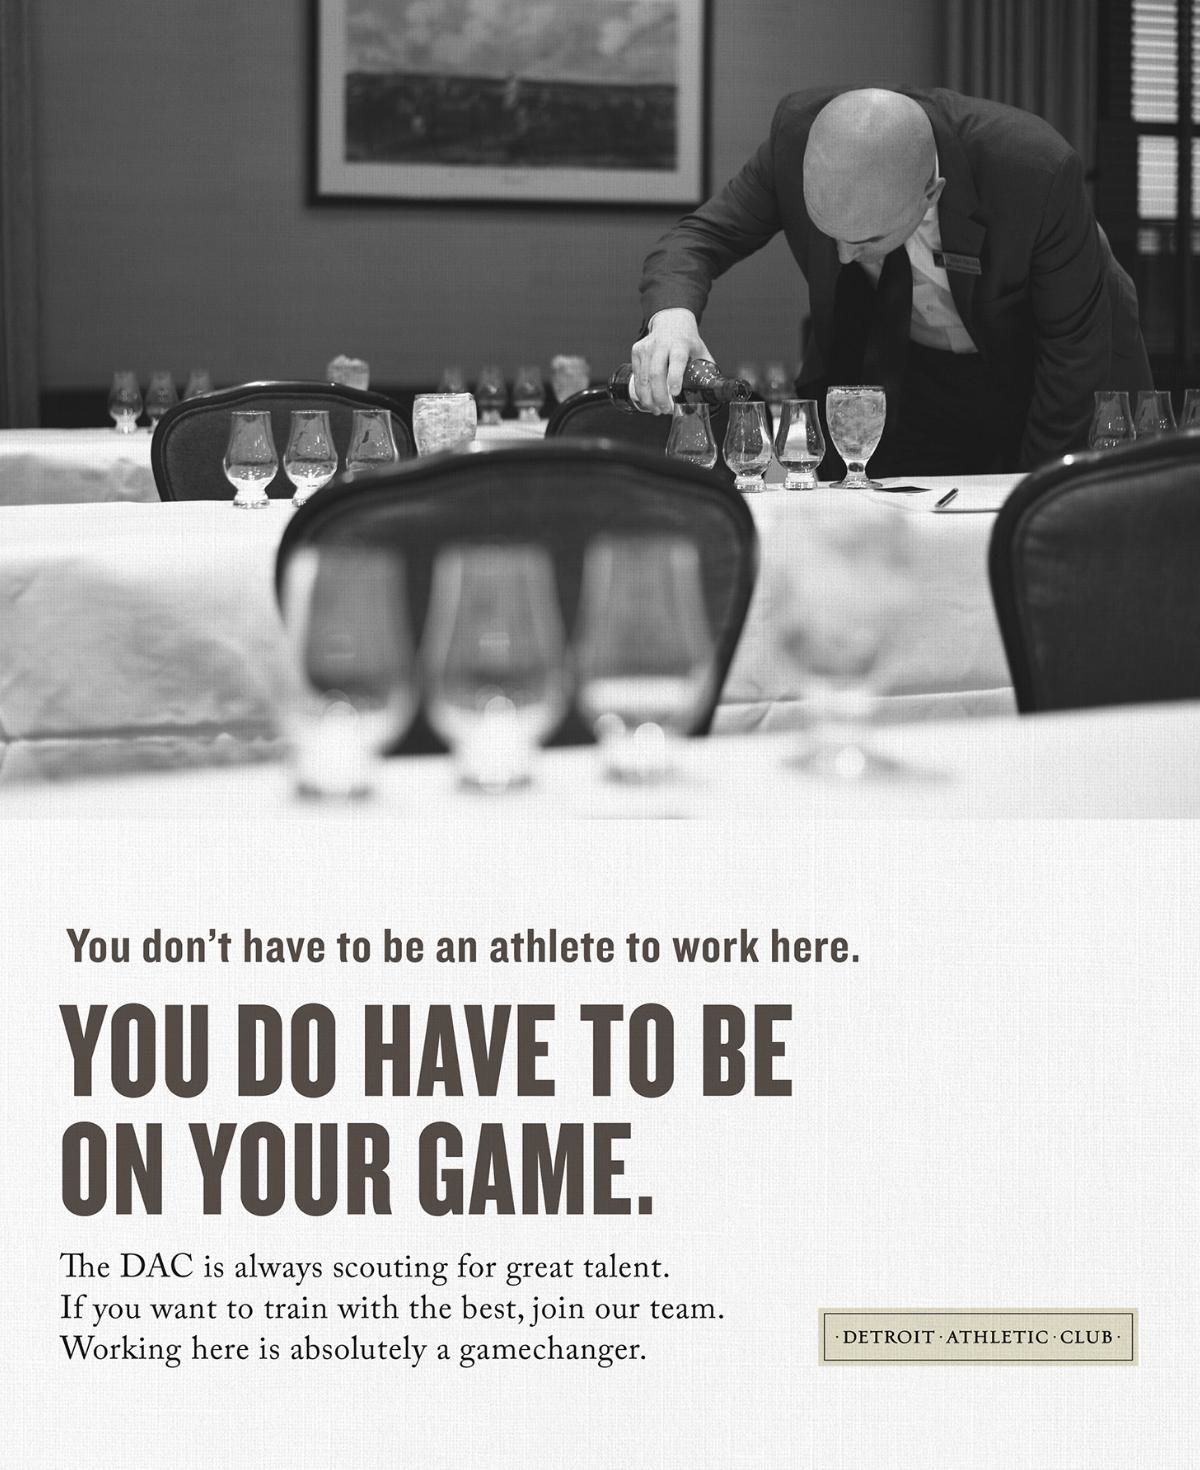 A recruitment poster - 'You don't have to be an athlete to work here. You do have to be on your game.'